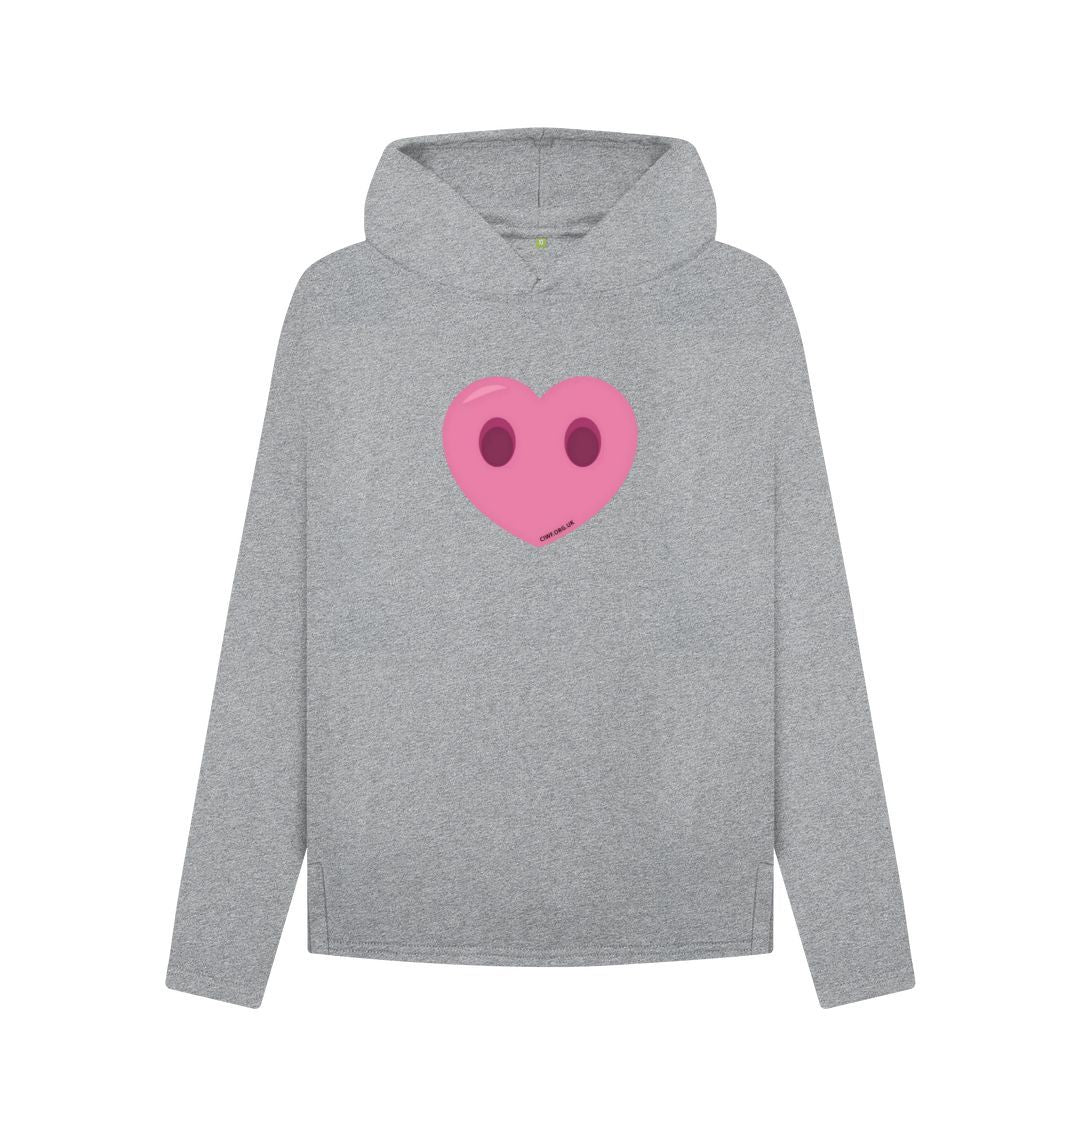 Athletic Grey Women's Compassion Heart Relaxed Fit Hoodie